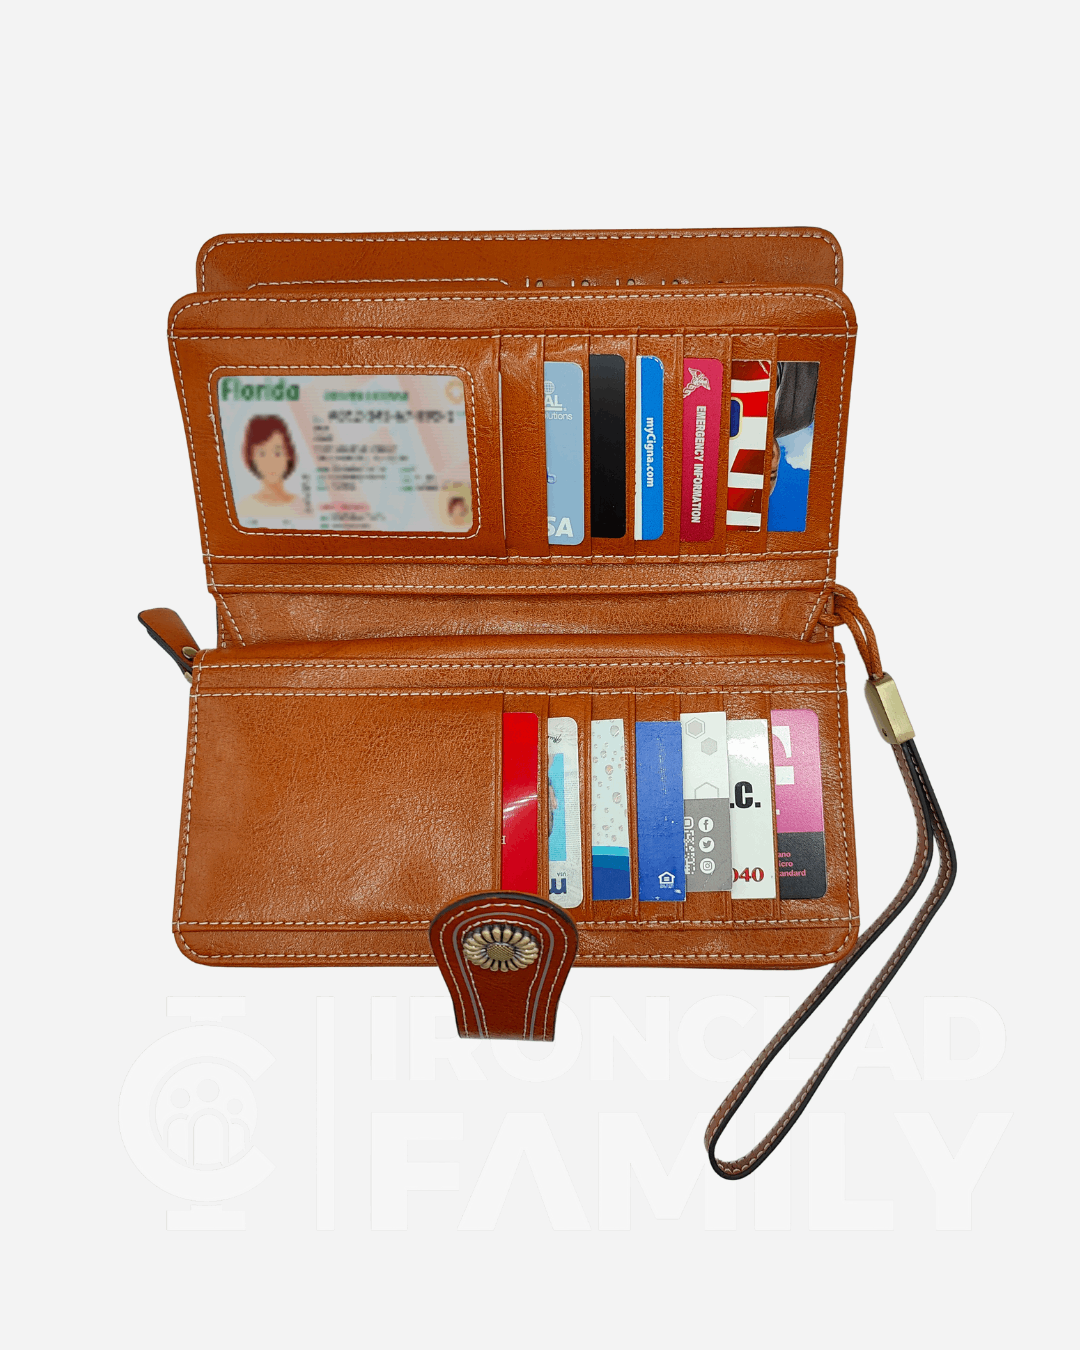 RFID blocking wallet filled with credit cards and other items